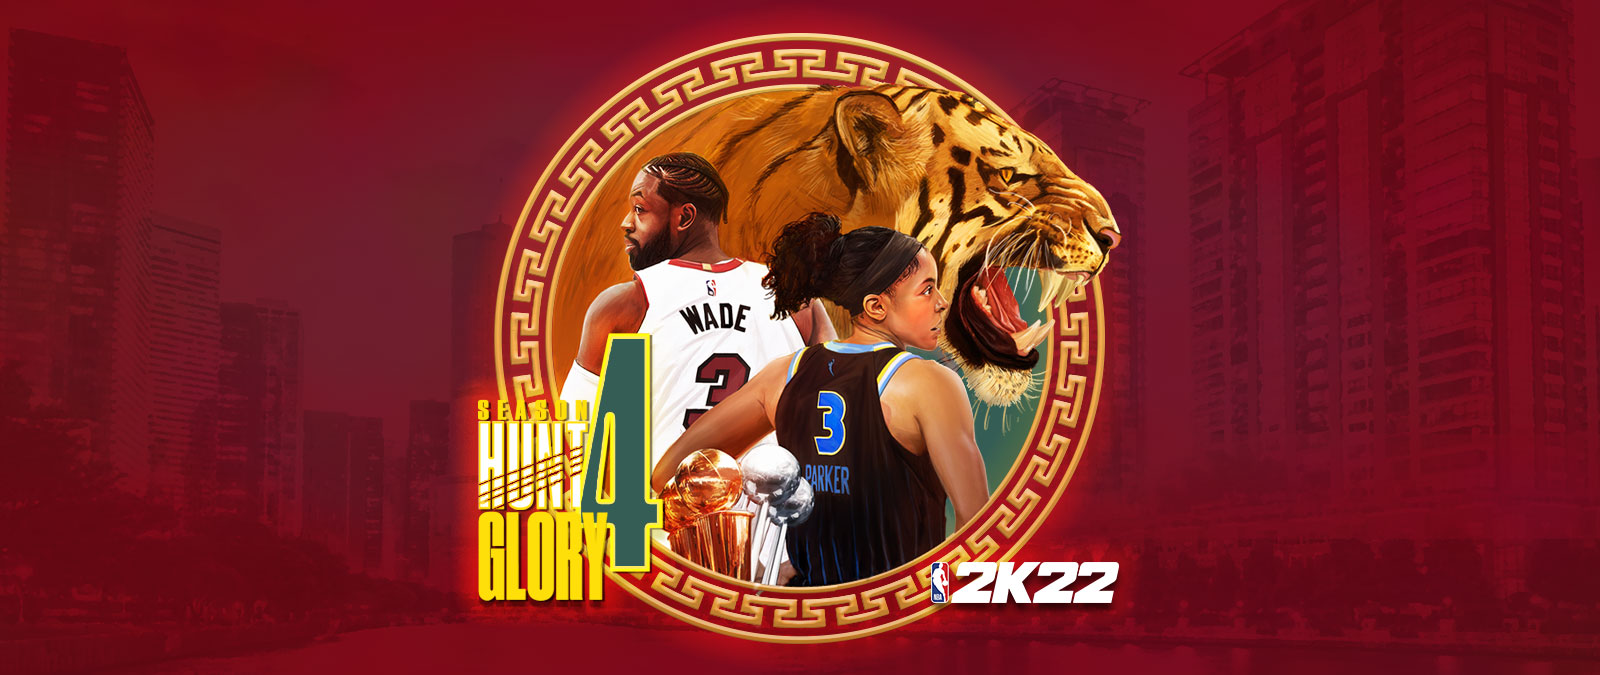 NBA 2K22, Season 4: Hunt 4 Glory, a circular graphical element laid over a red hued cityscape depicts a snarling tiger as well as Dwayne Wade and Candace Parker with their backs turned. 